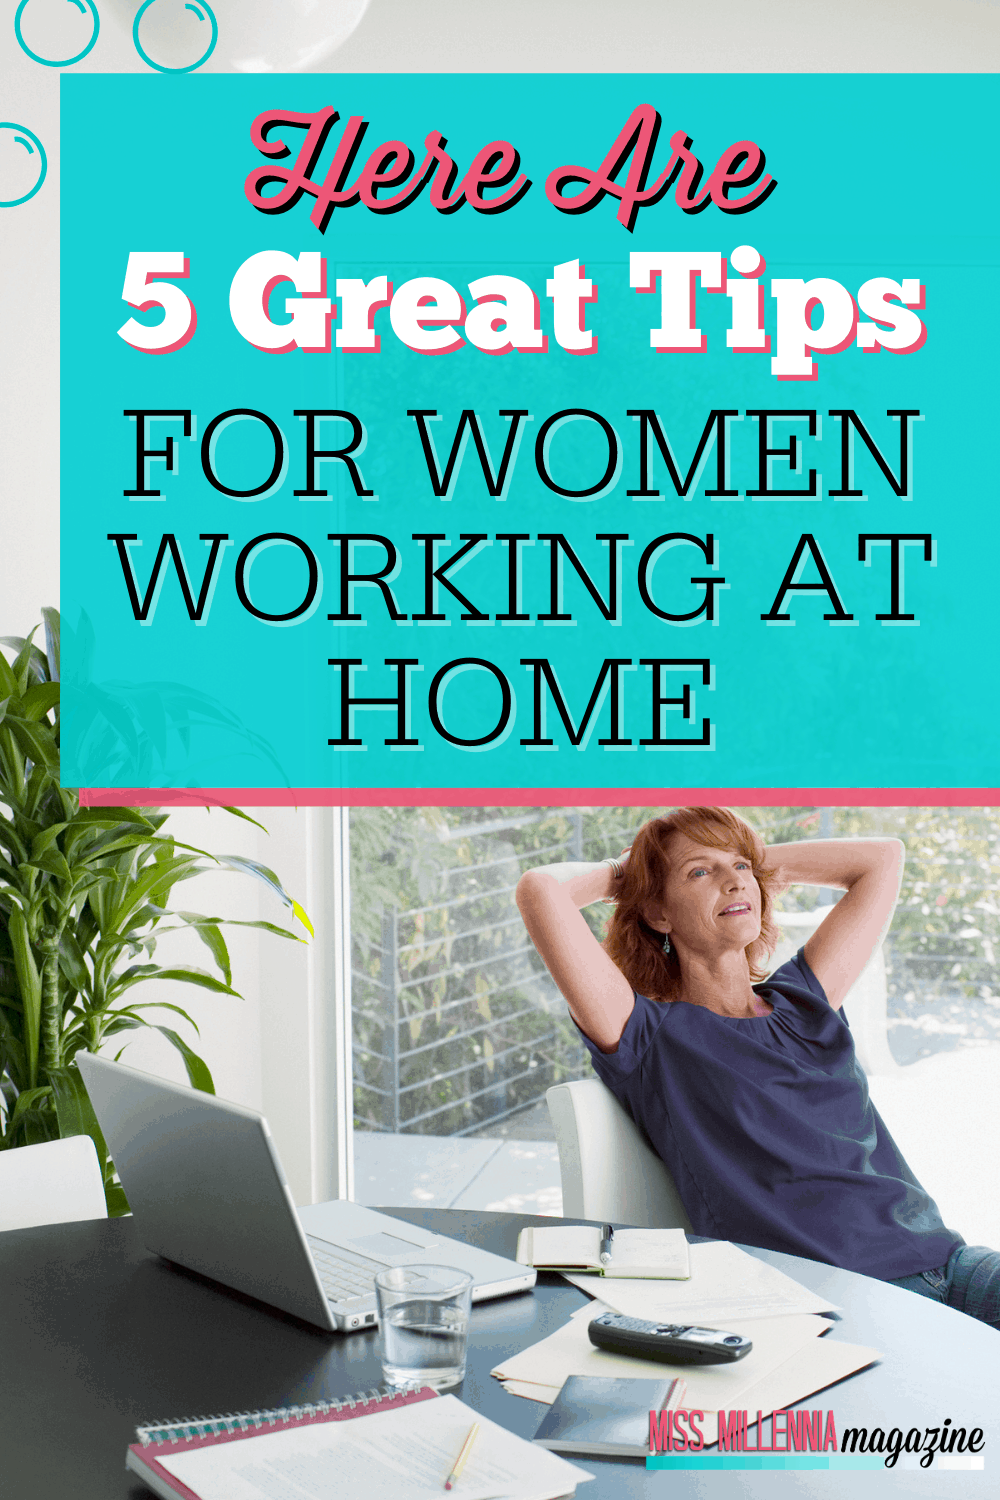 Here Are 5 Great Tips For Women Working At Home